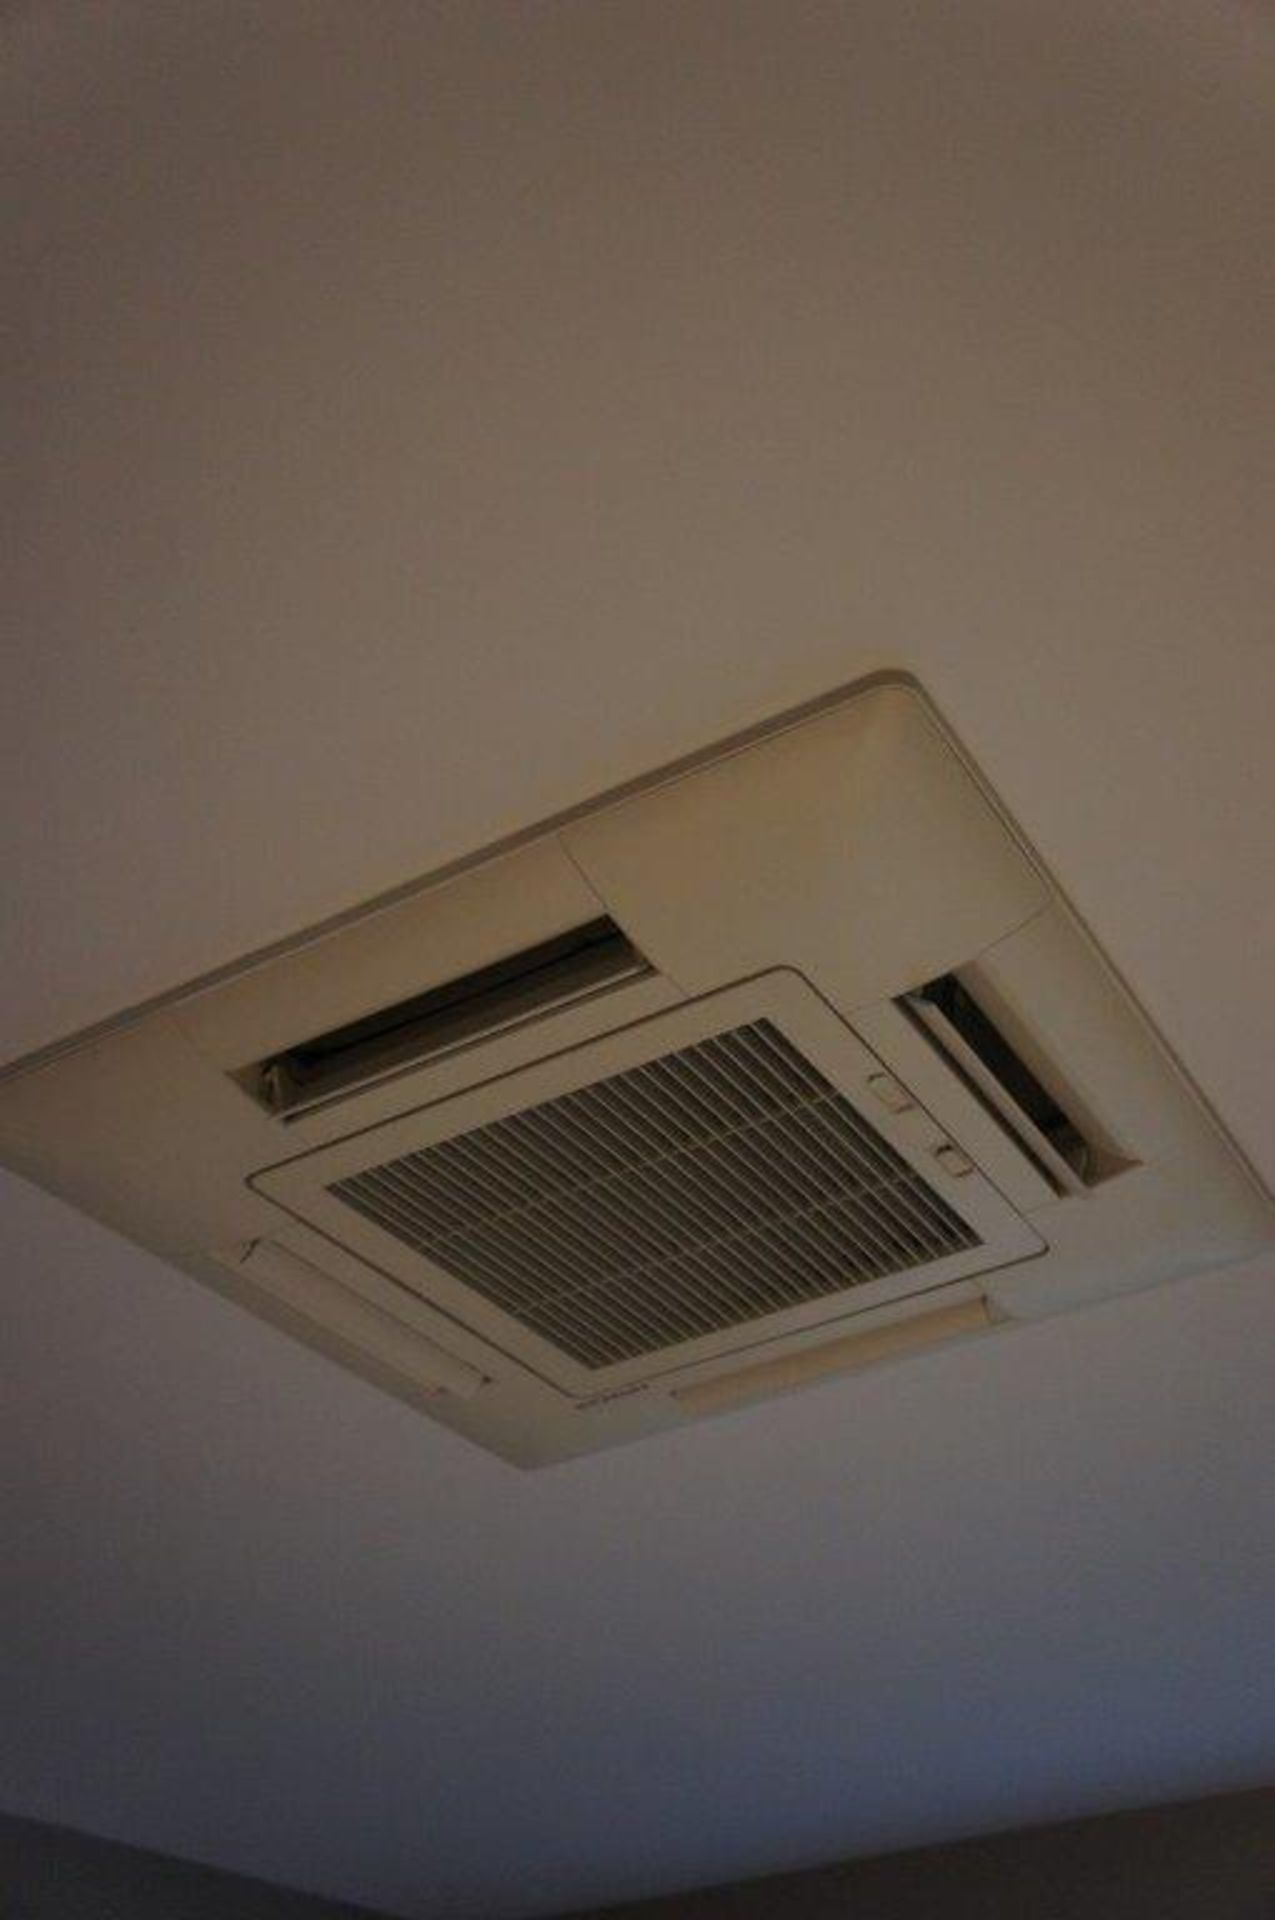 Hitachi Ceiling Mounted Air Conditioning Unit